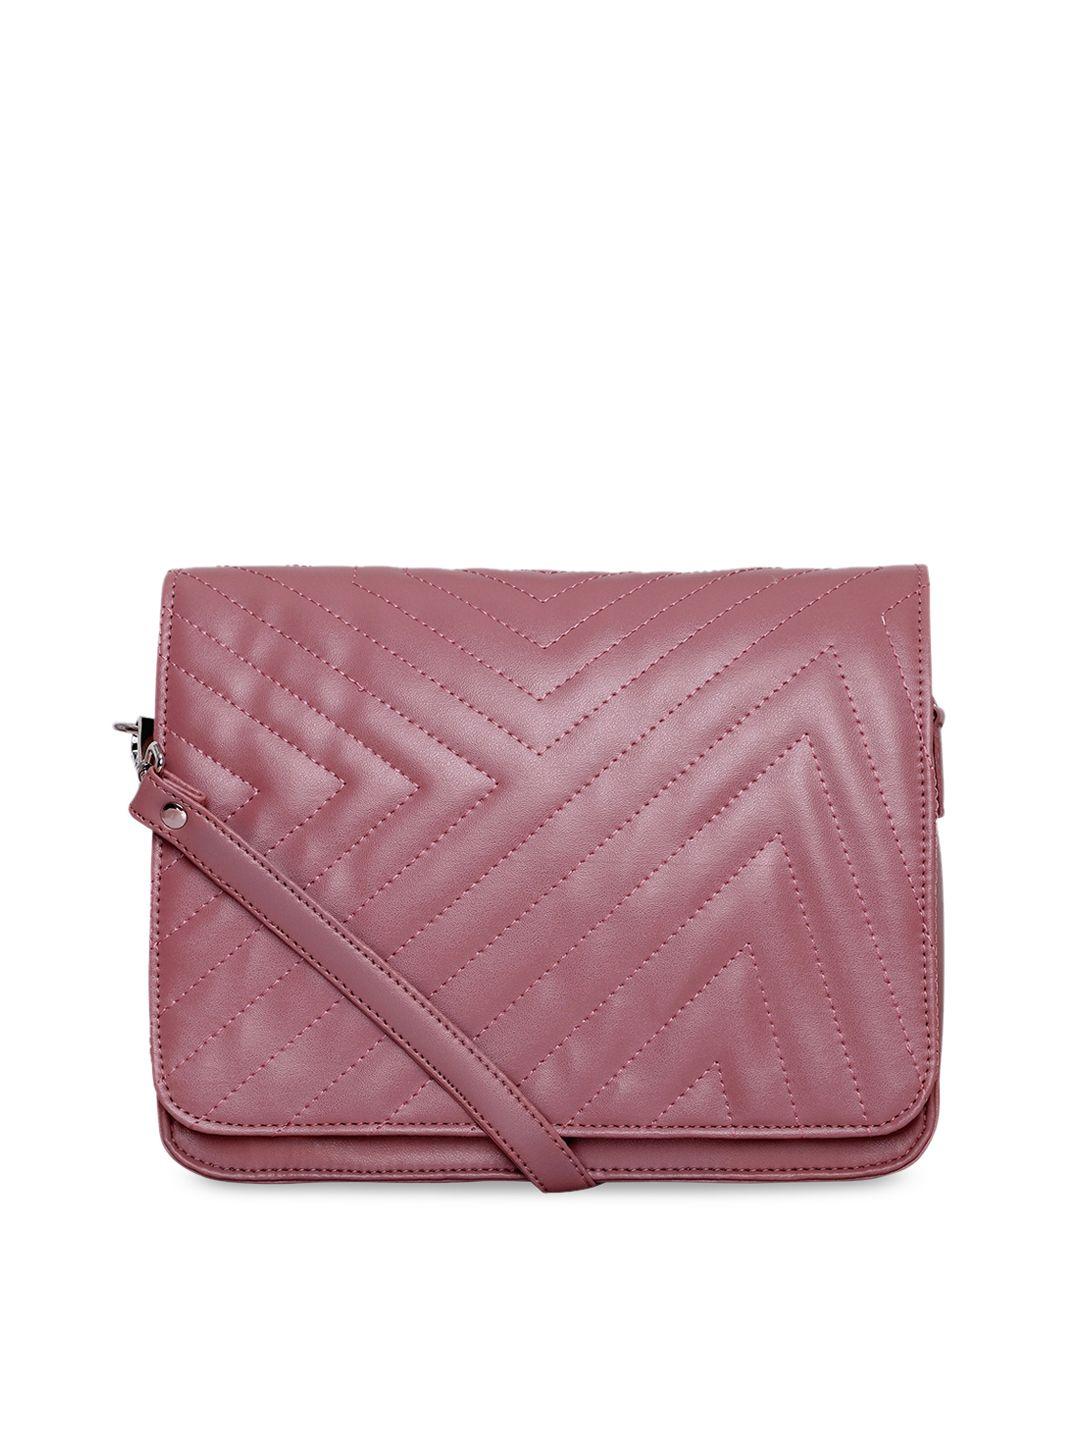 toteteca mauve textured pu oversized structured sling bag with quilted